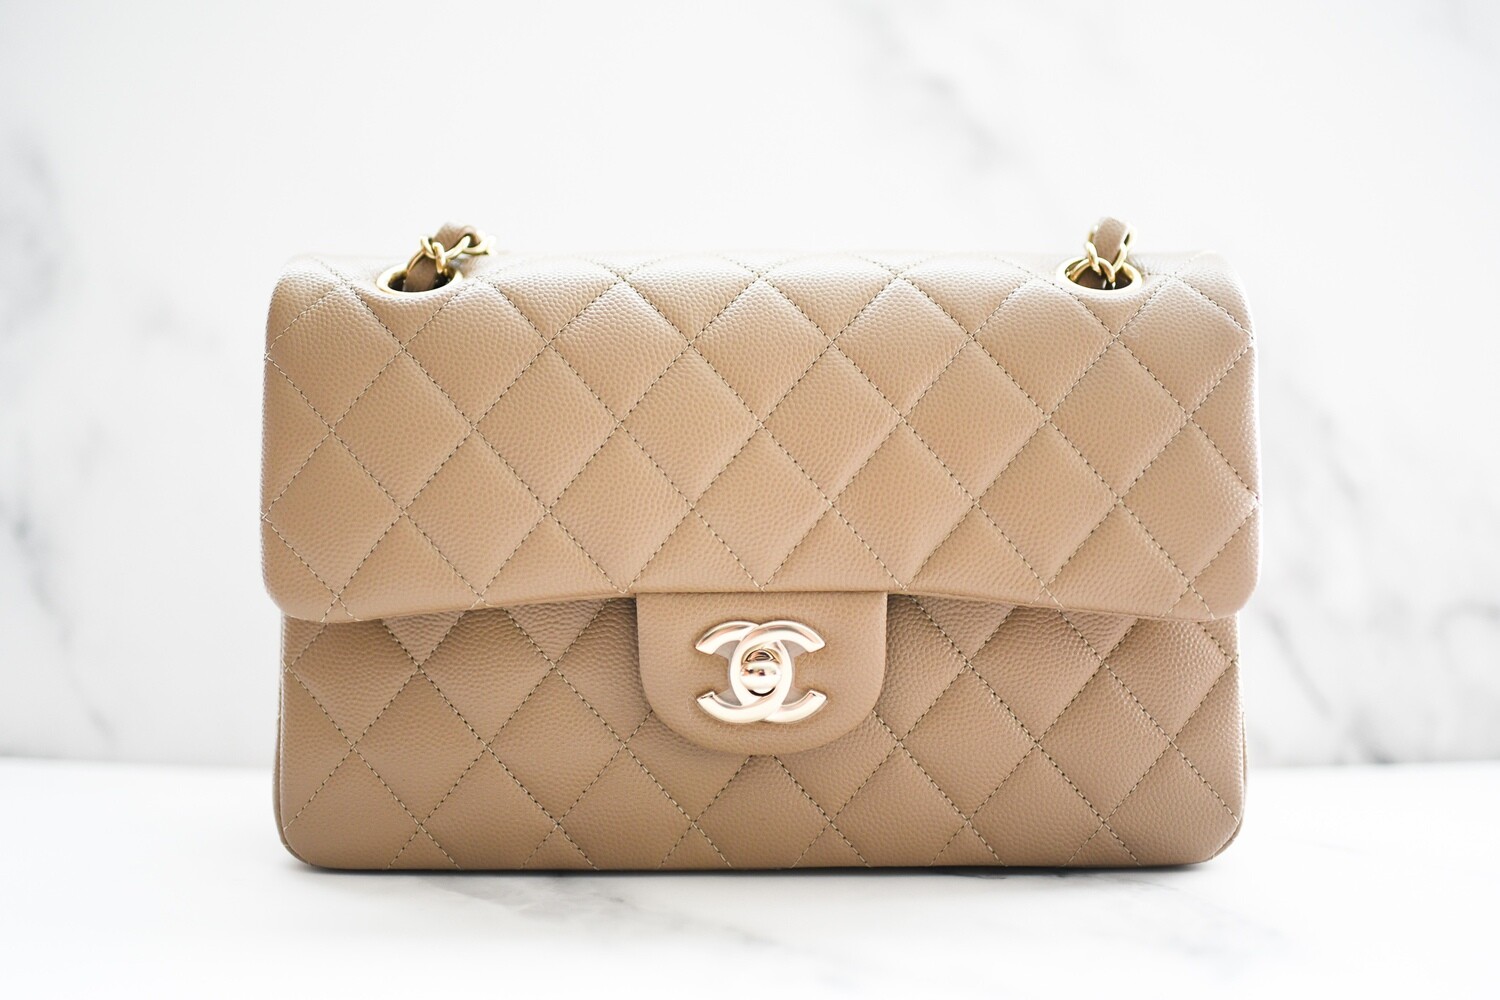 symmetri Lignende Måling Chanel Classic Small Double Flap, 22A Dark Beige Caviar Leather with Gold  Hardware, New in Box